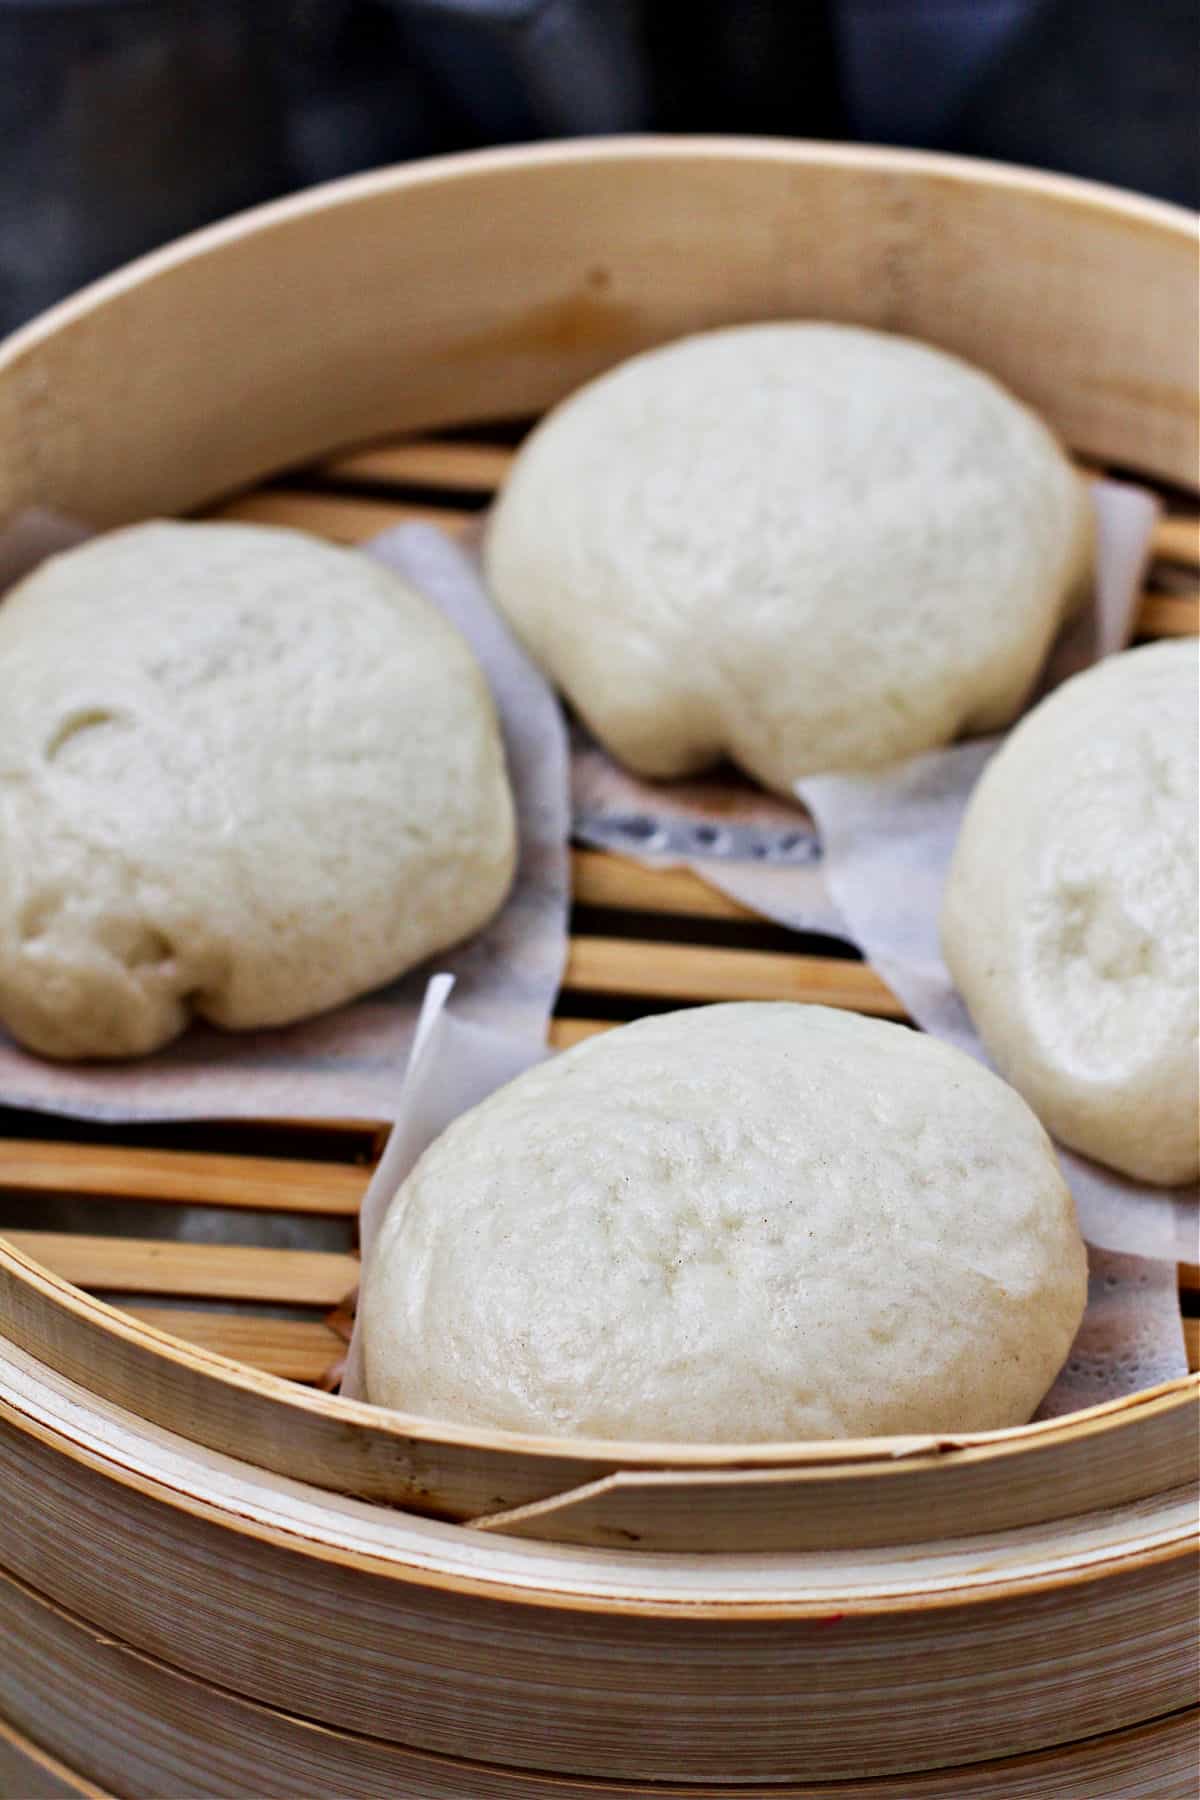 Steamed buns in a bamboo steamer with parchment squares.